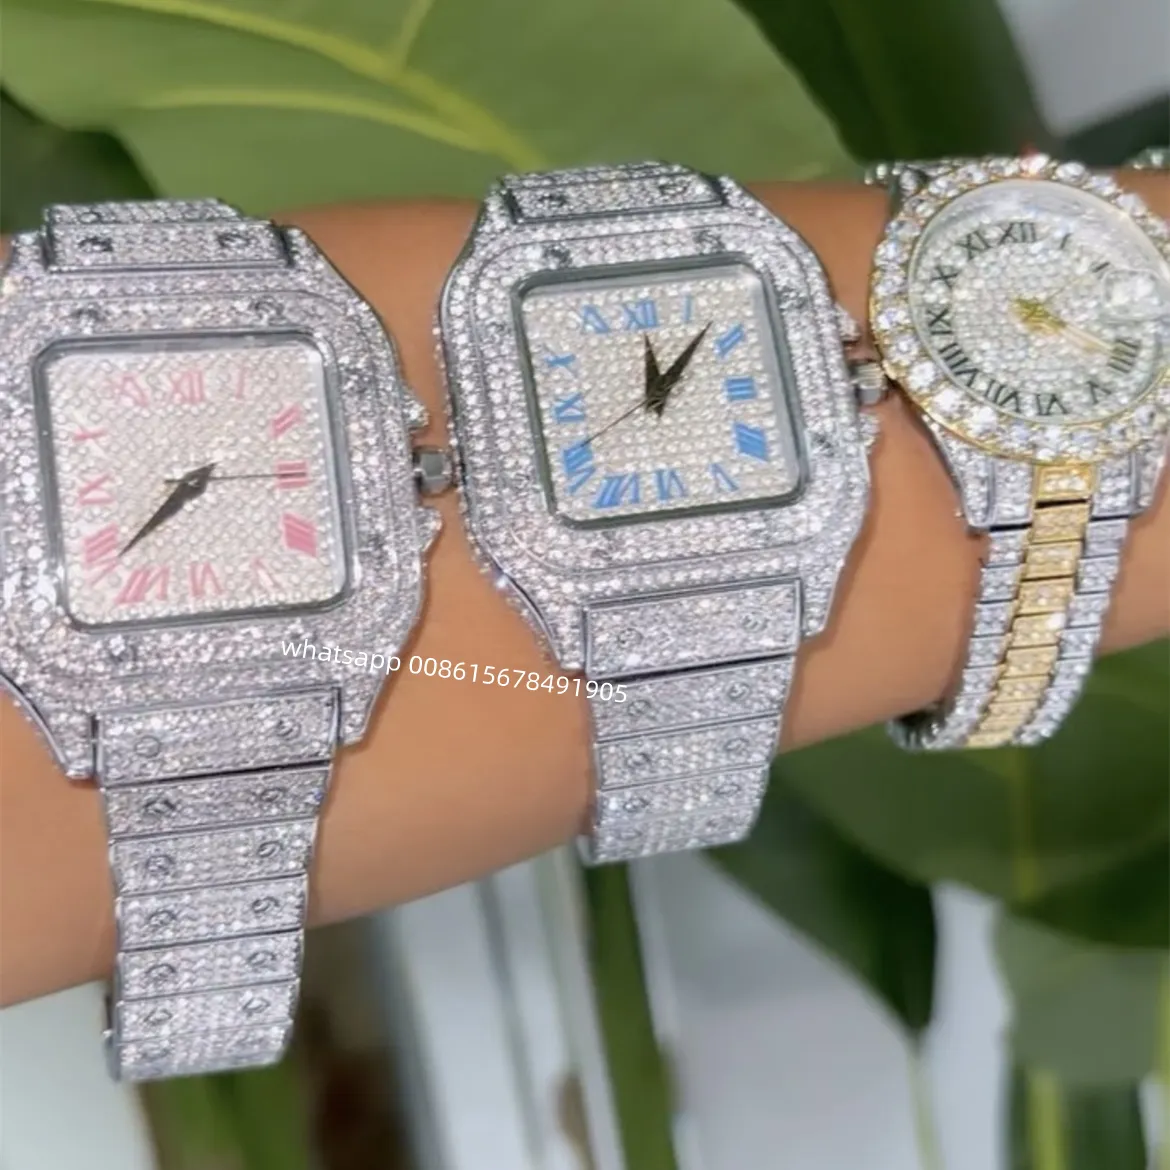 Foxi Luxury Bling Hip Hop Iced Out Watches Silver Pink Blue Digital Quartz Watches Diamond Wristwatch